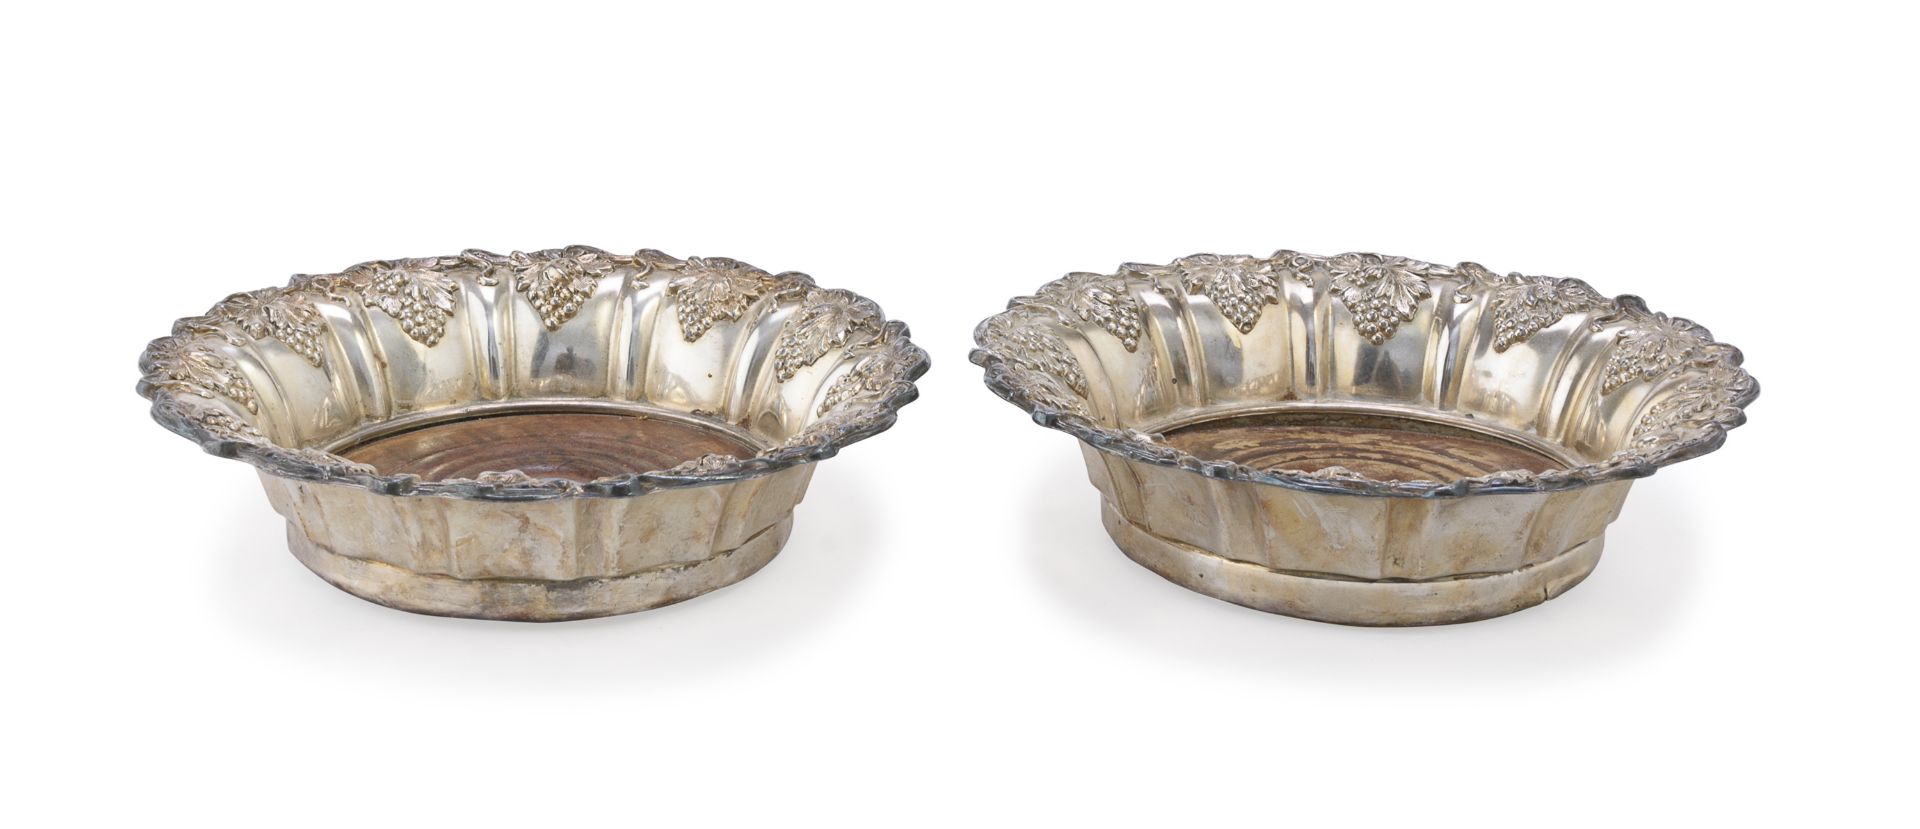 PAIR OF SILVER-PLATED BOTTLE COASTERS SHEFFIELD 1900